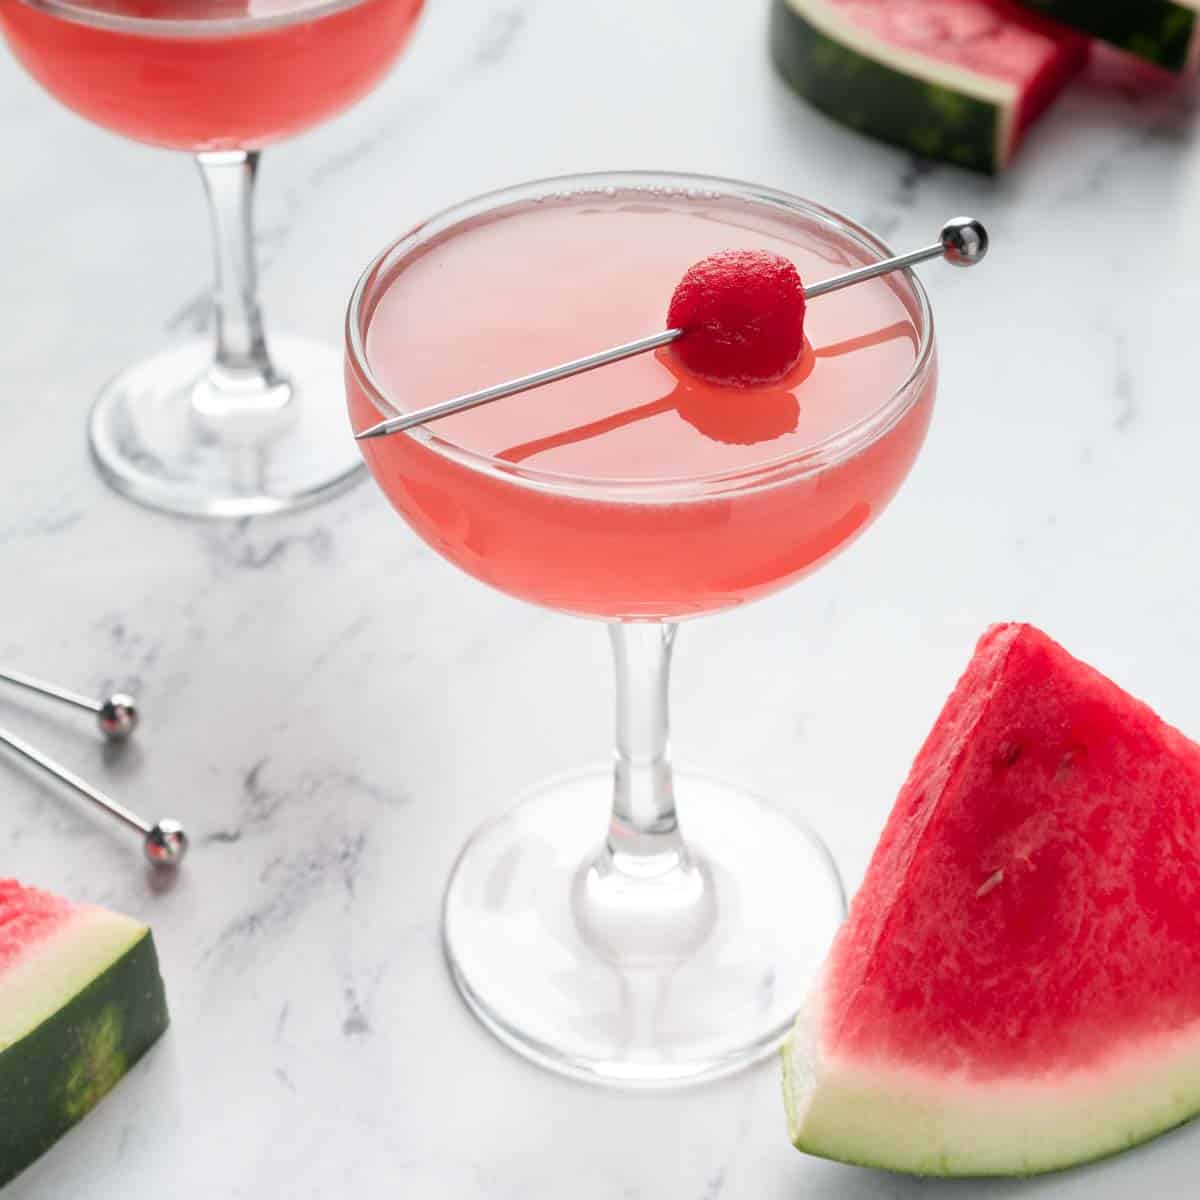 A photo of a watermelon martini garnished with a melon ball